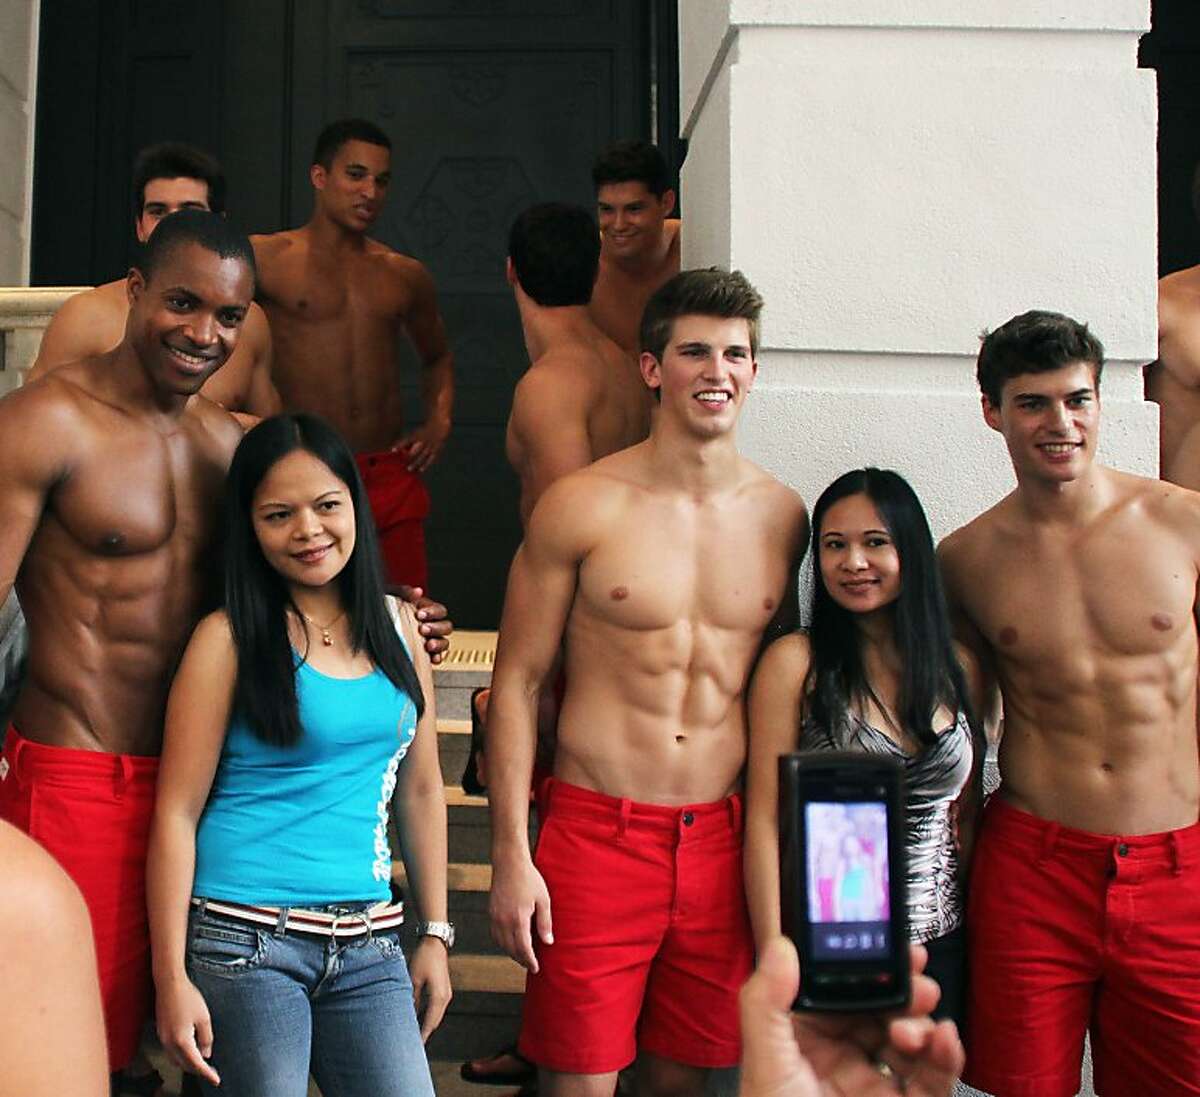 Controversial Abercrombie And Fitch Ads